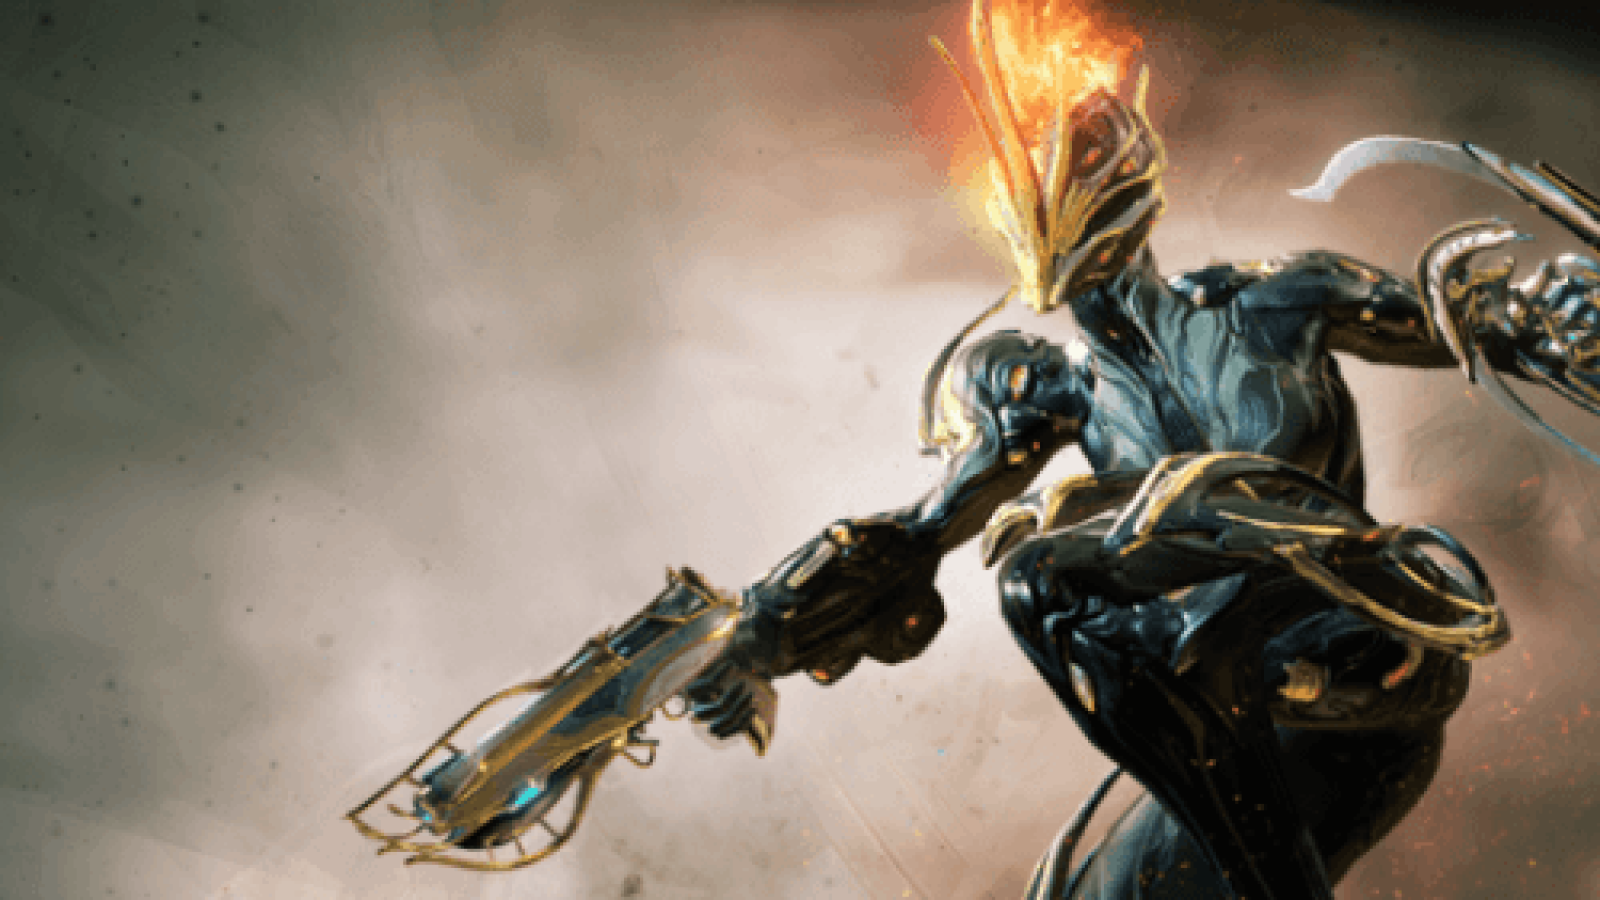 LAST CHANCE FOR EMBER PRIME IN THE VOID!